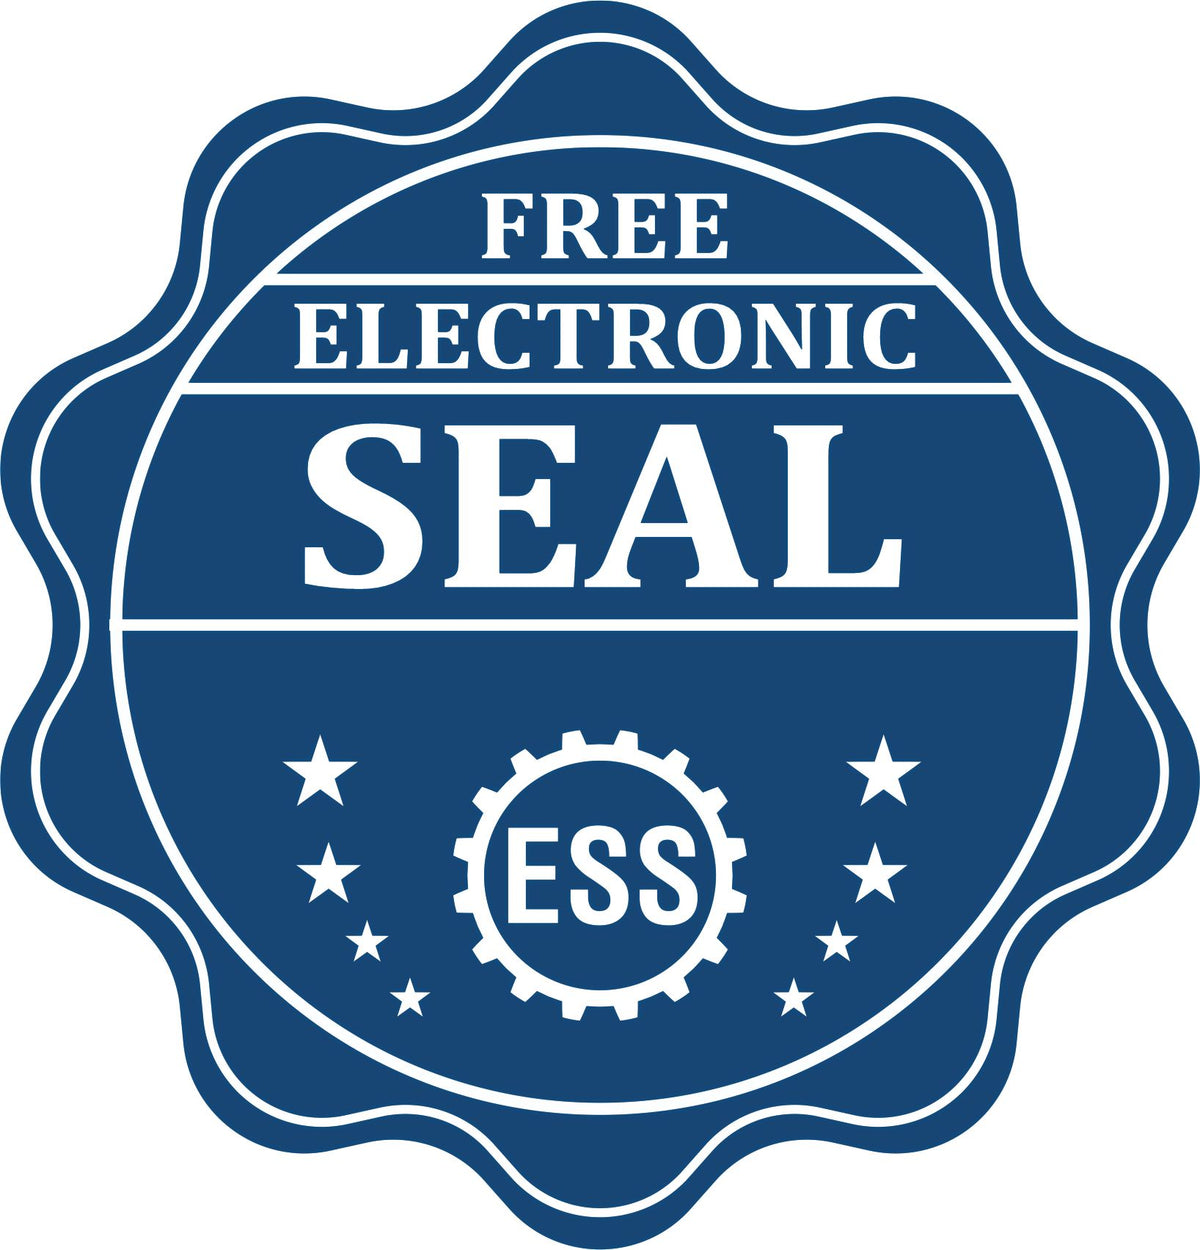 A badge showing a free electronic seal for the Heavy Duty Cast Iron Iowa Land Surveyor Seal Embosser with stars and the ESS gear on the emblem.